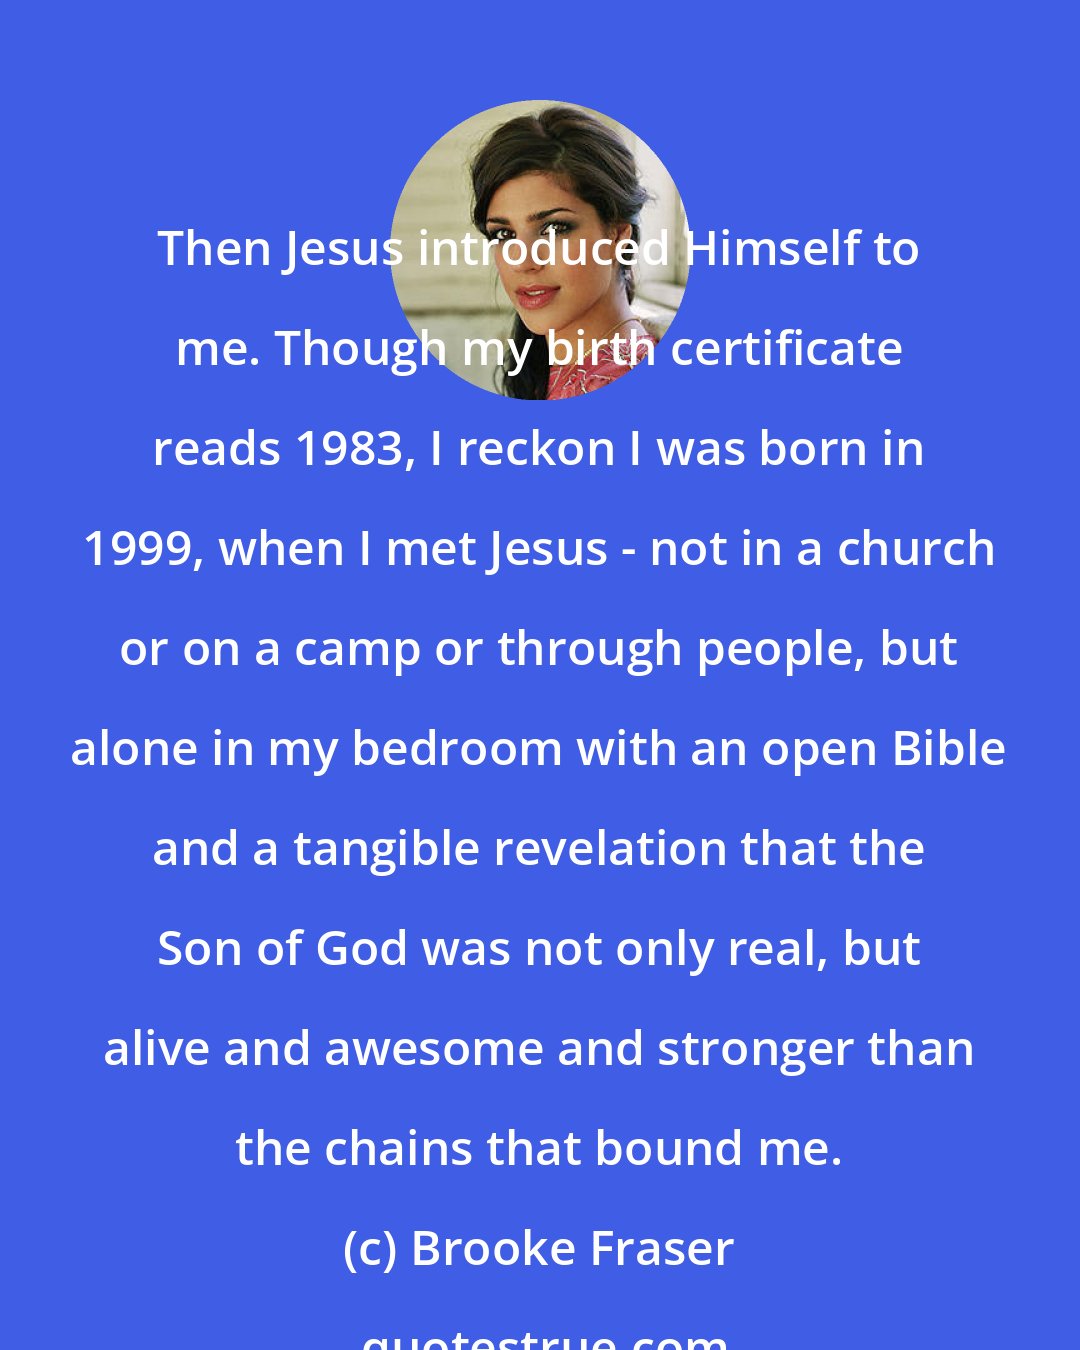 Brooke Fraser: Then Jesus introduced Himself to me. Though my birth certificate reads 1983, I reckon I was born in 1999, when I met Jesus - not in a church or on a camp or through people, but alone in my bedroom with an open Bible and a tangible revelation that the Son of God was not only real, but alive and awesome and stronger than the chains that bound me.